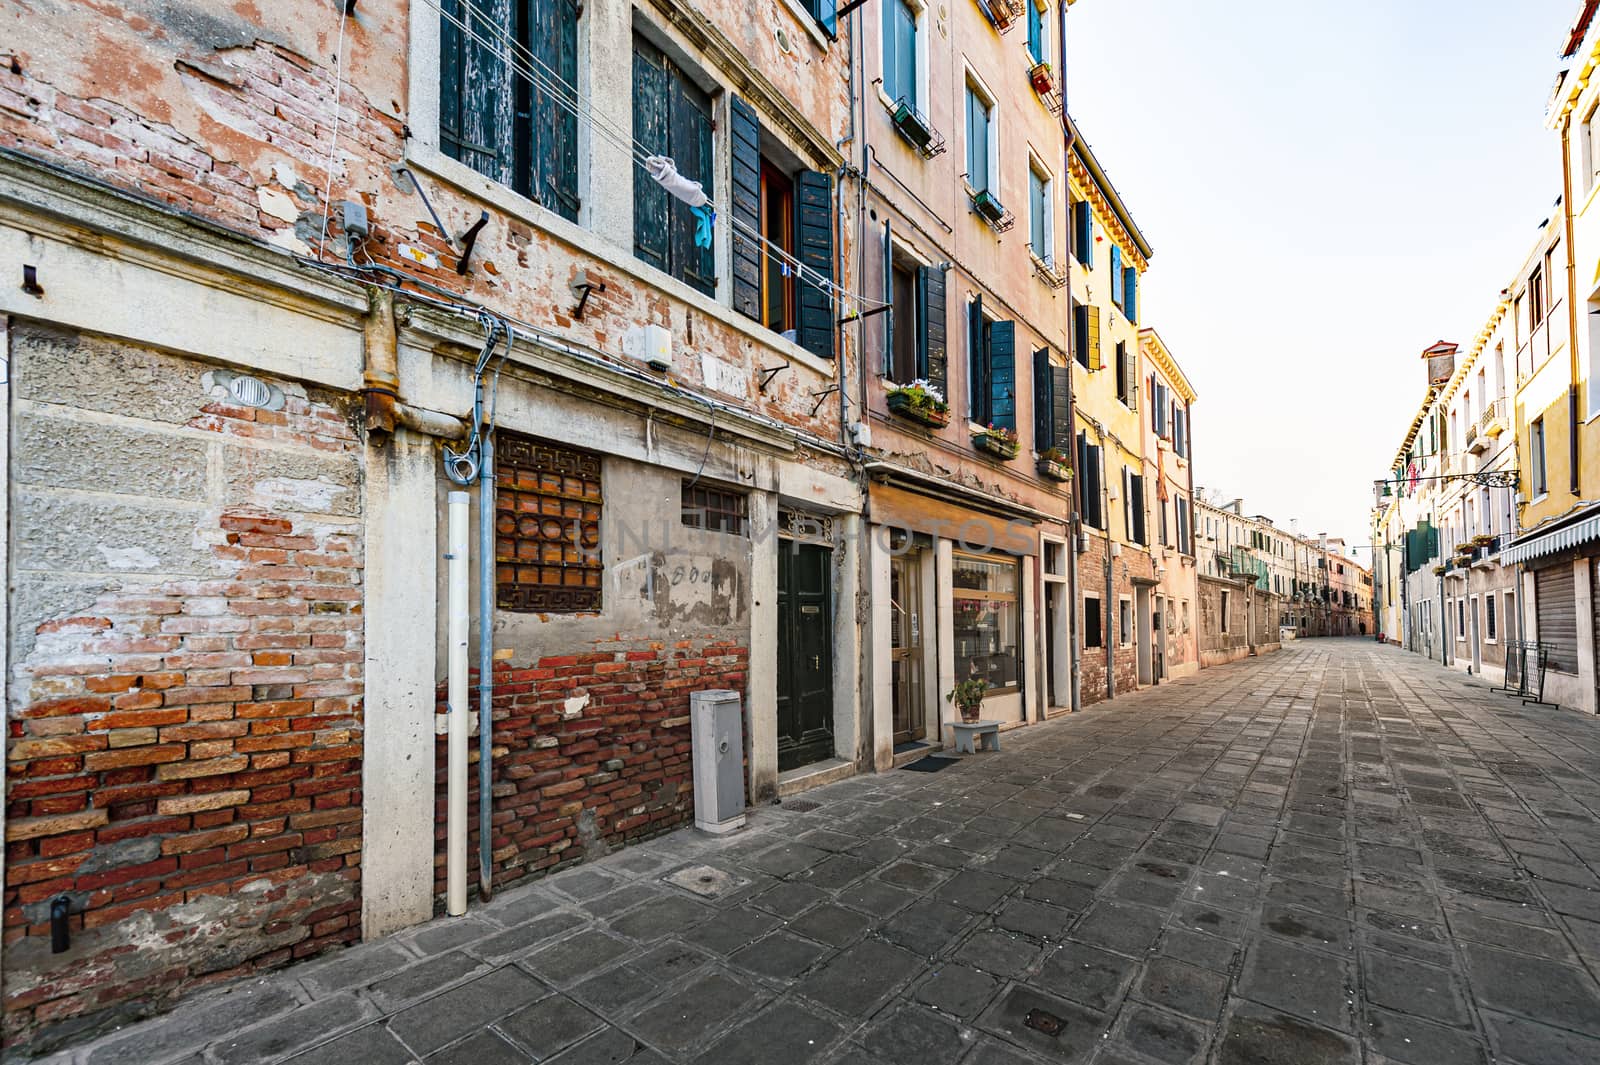 Deserted streets of Venice. Museum City is situated across a group of islands that are separated by canals and linked by empty bridges.  